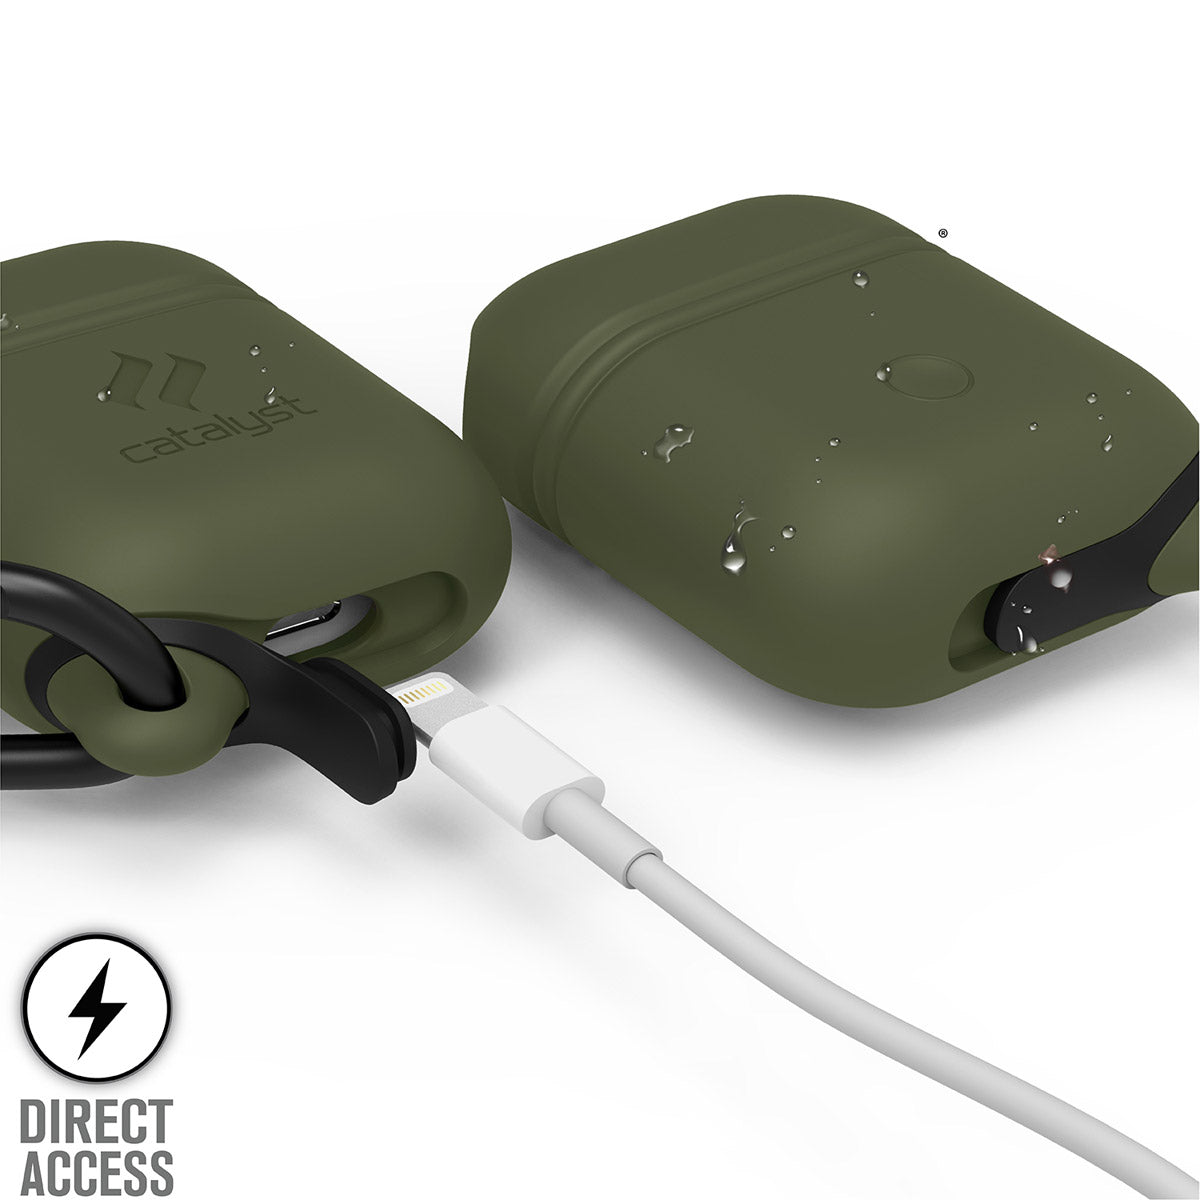 Catalyst airpods gen2/1 waterproof case + carabiner showing the front and back with lightning port in army green text reads direct access